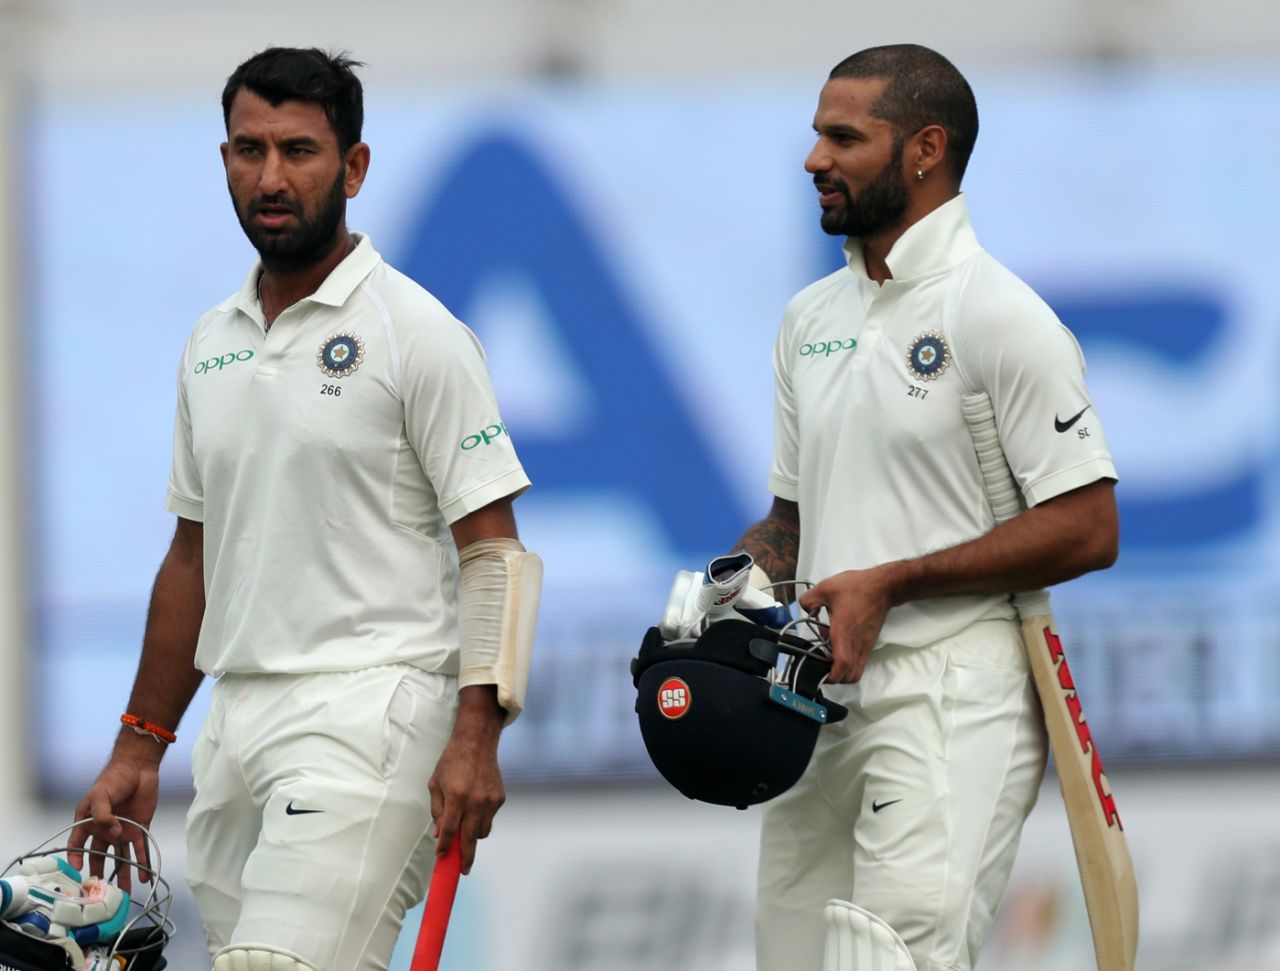 Cheteshwar Pujara and Shikhar Dhawan steadied India's innings after the loss of two early wickets, India v Sri Lanka, 3rd Test, Delhi, 4th day, December 5, 2017